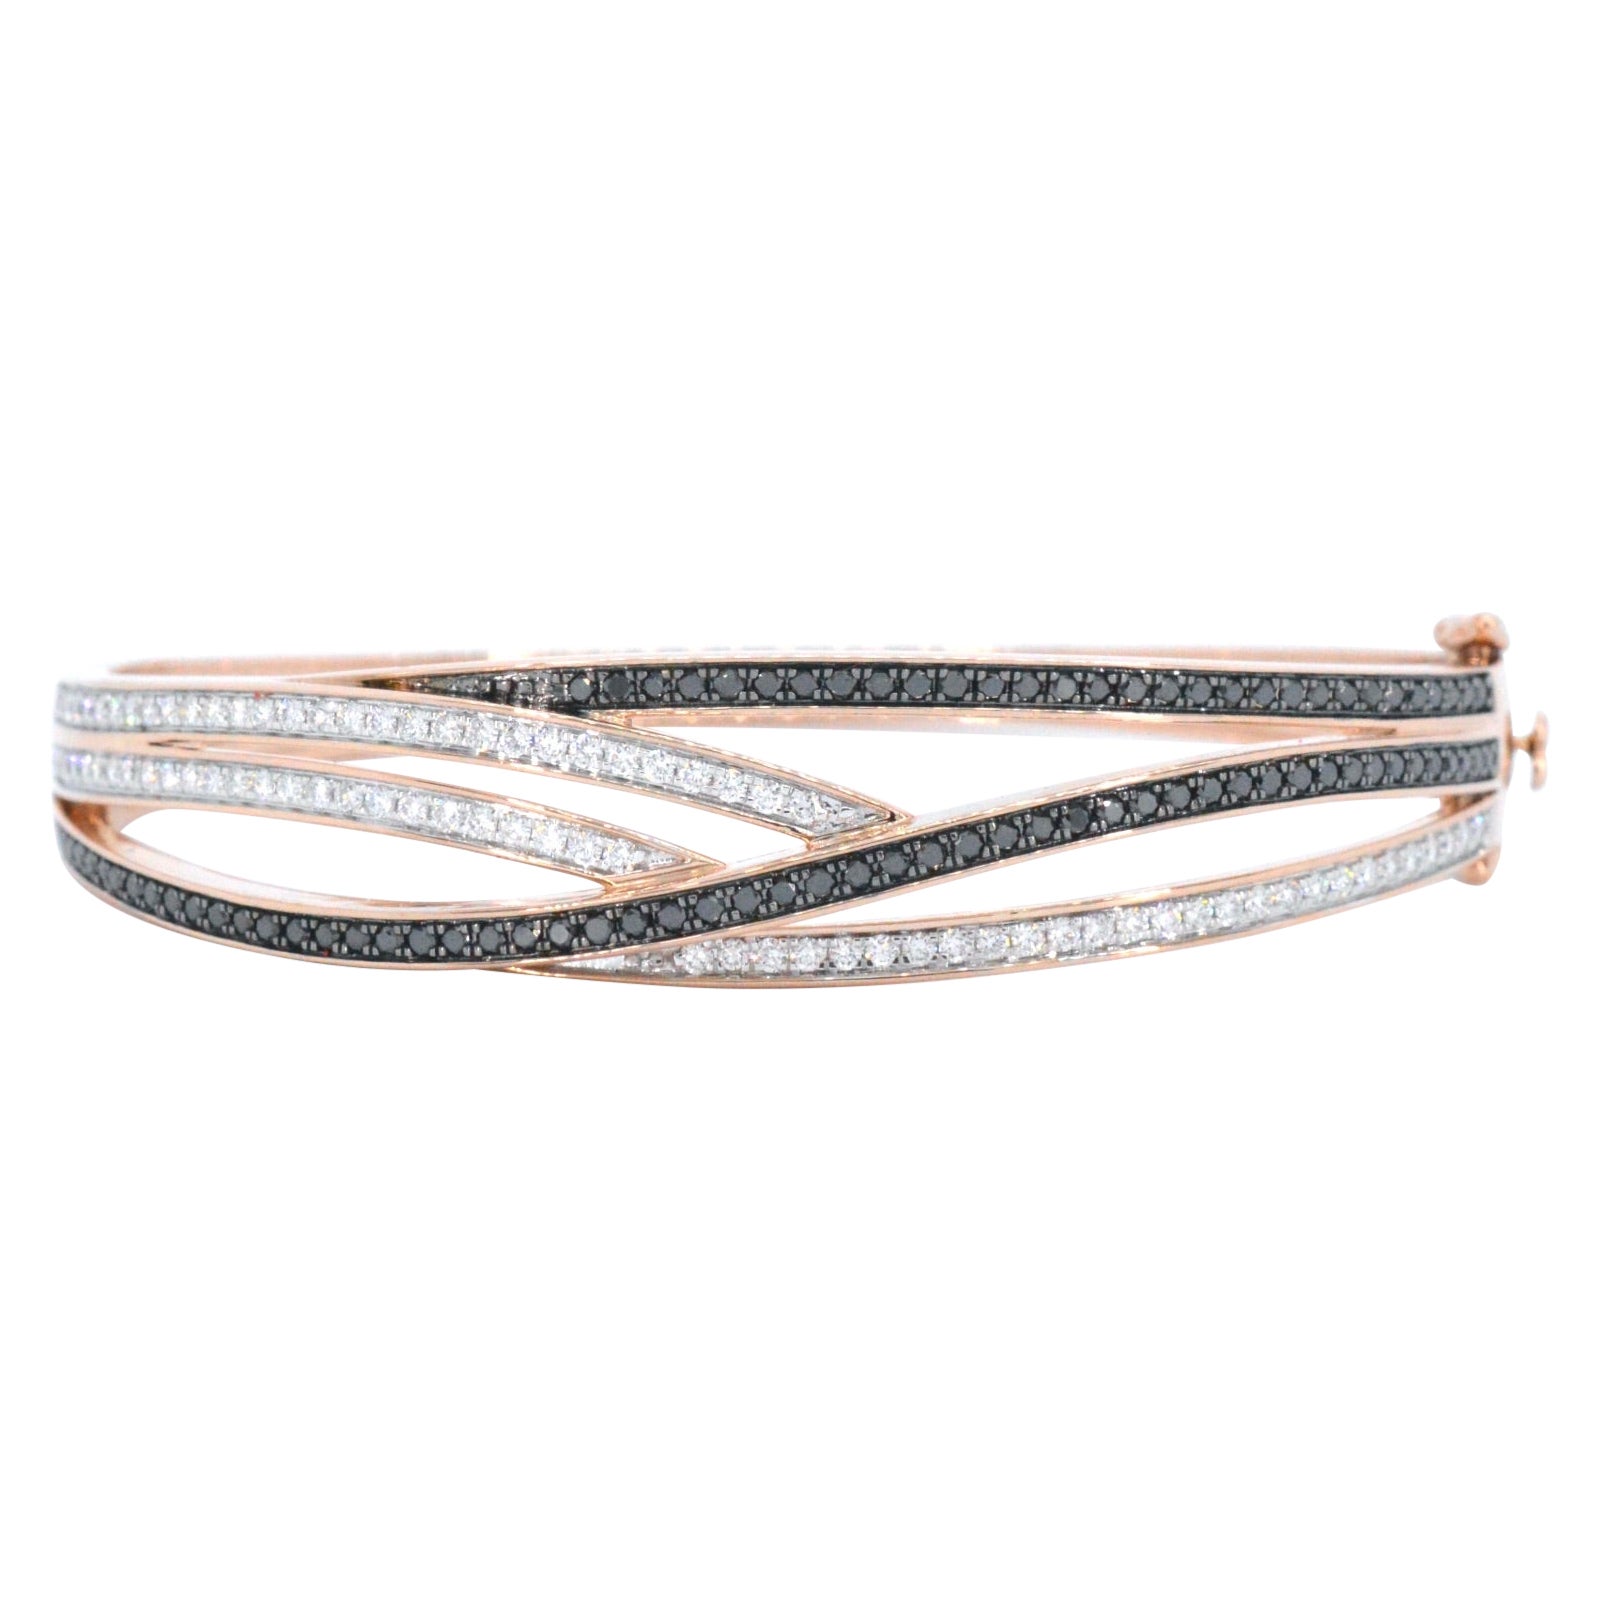 AIG Certified, Rose Gold Design Bracelet with White and Black Brilliant Diamond